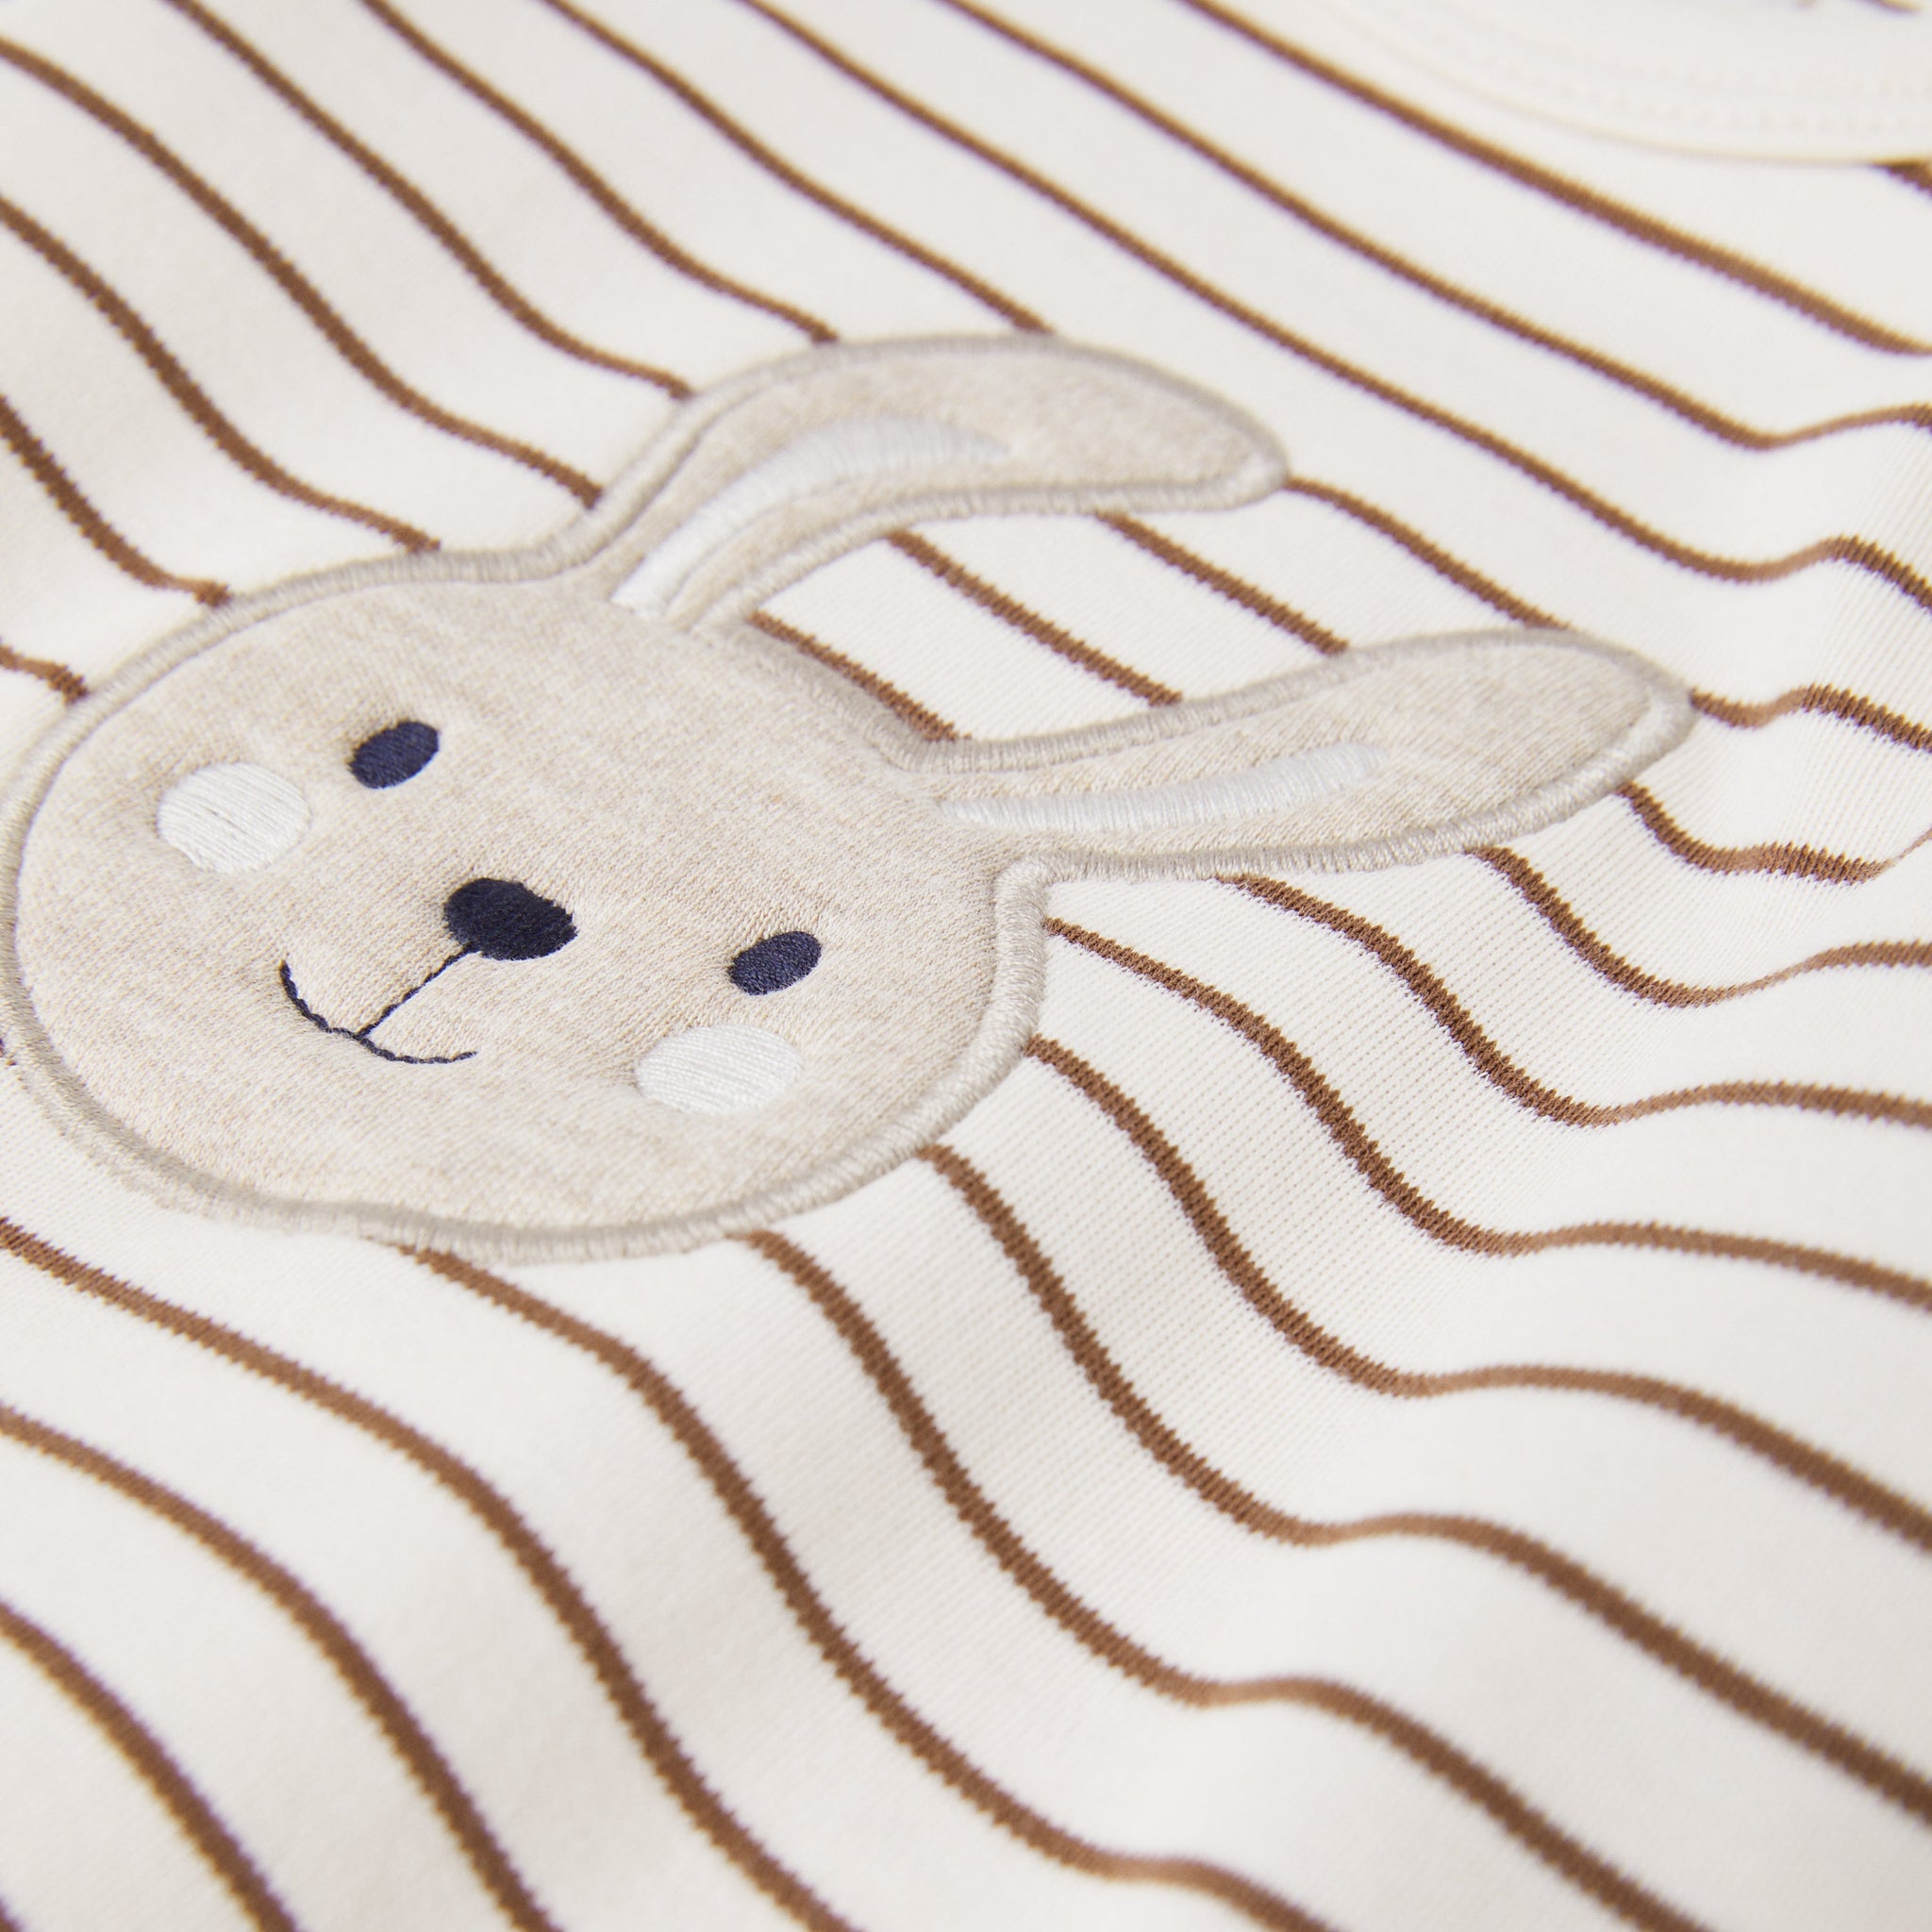 Beige Bunny Newborn Baby Top from the Polarn O. Pyret Kidswear collection. Ethically produced kids clothing.